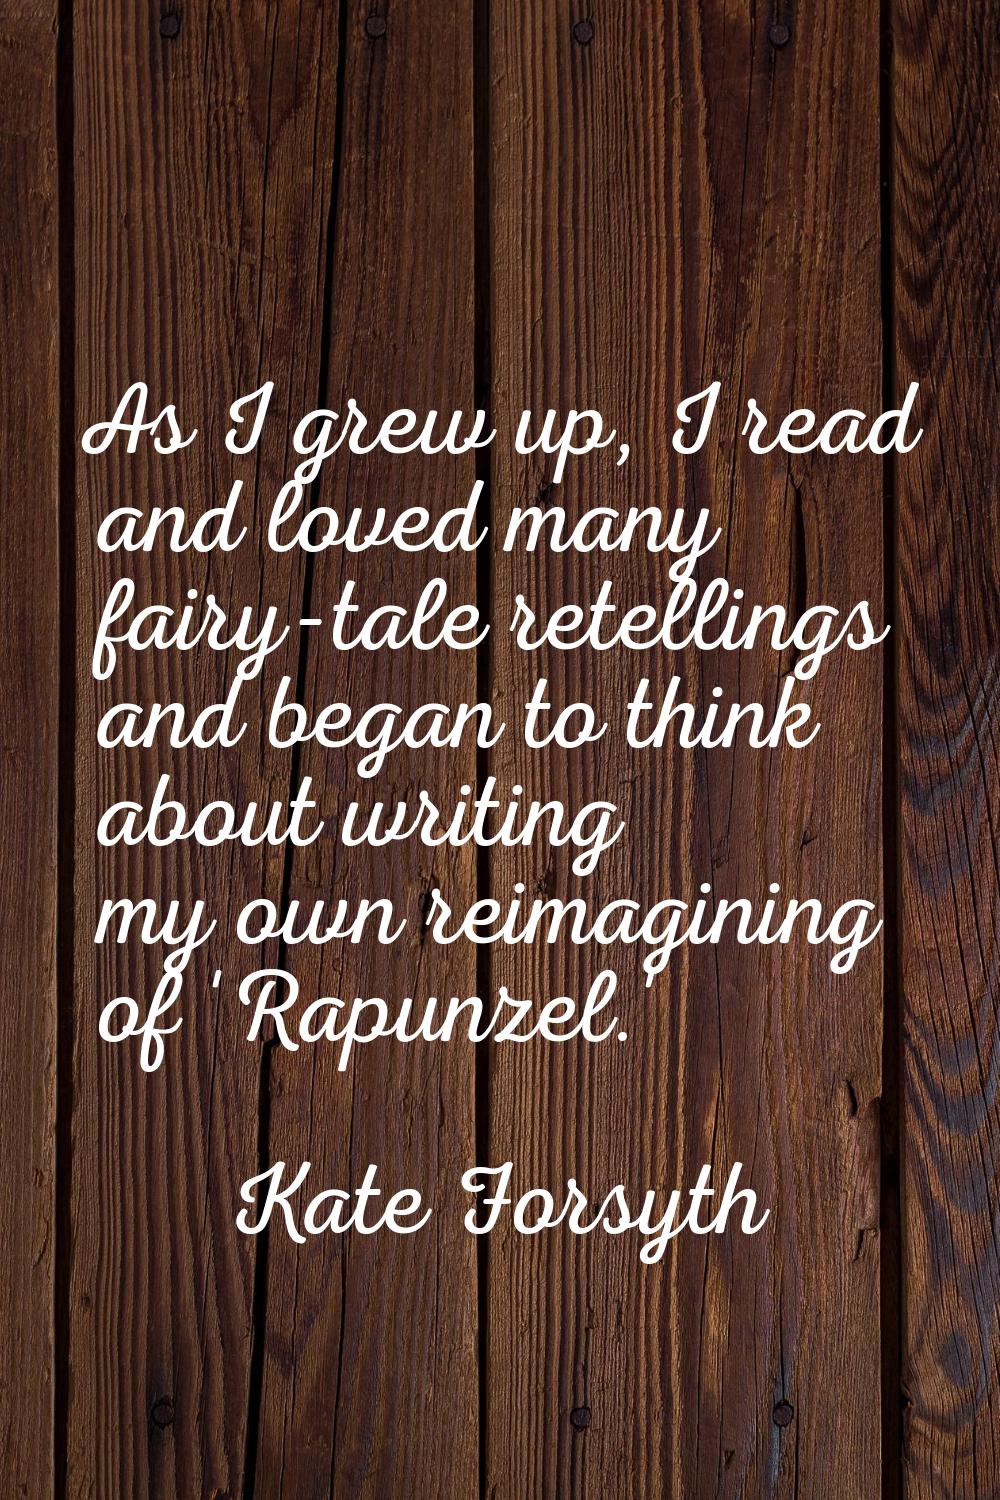 As I grew up, I read and loved many fairy-tale retellings and began to think about writing my own r